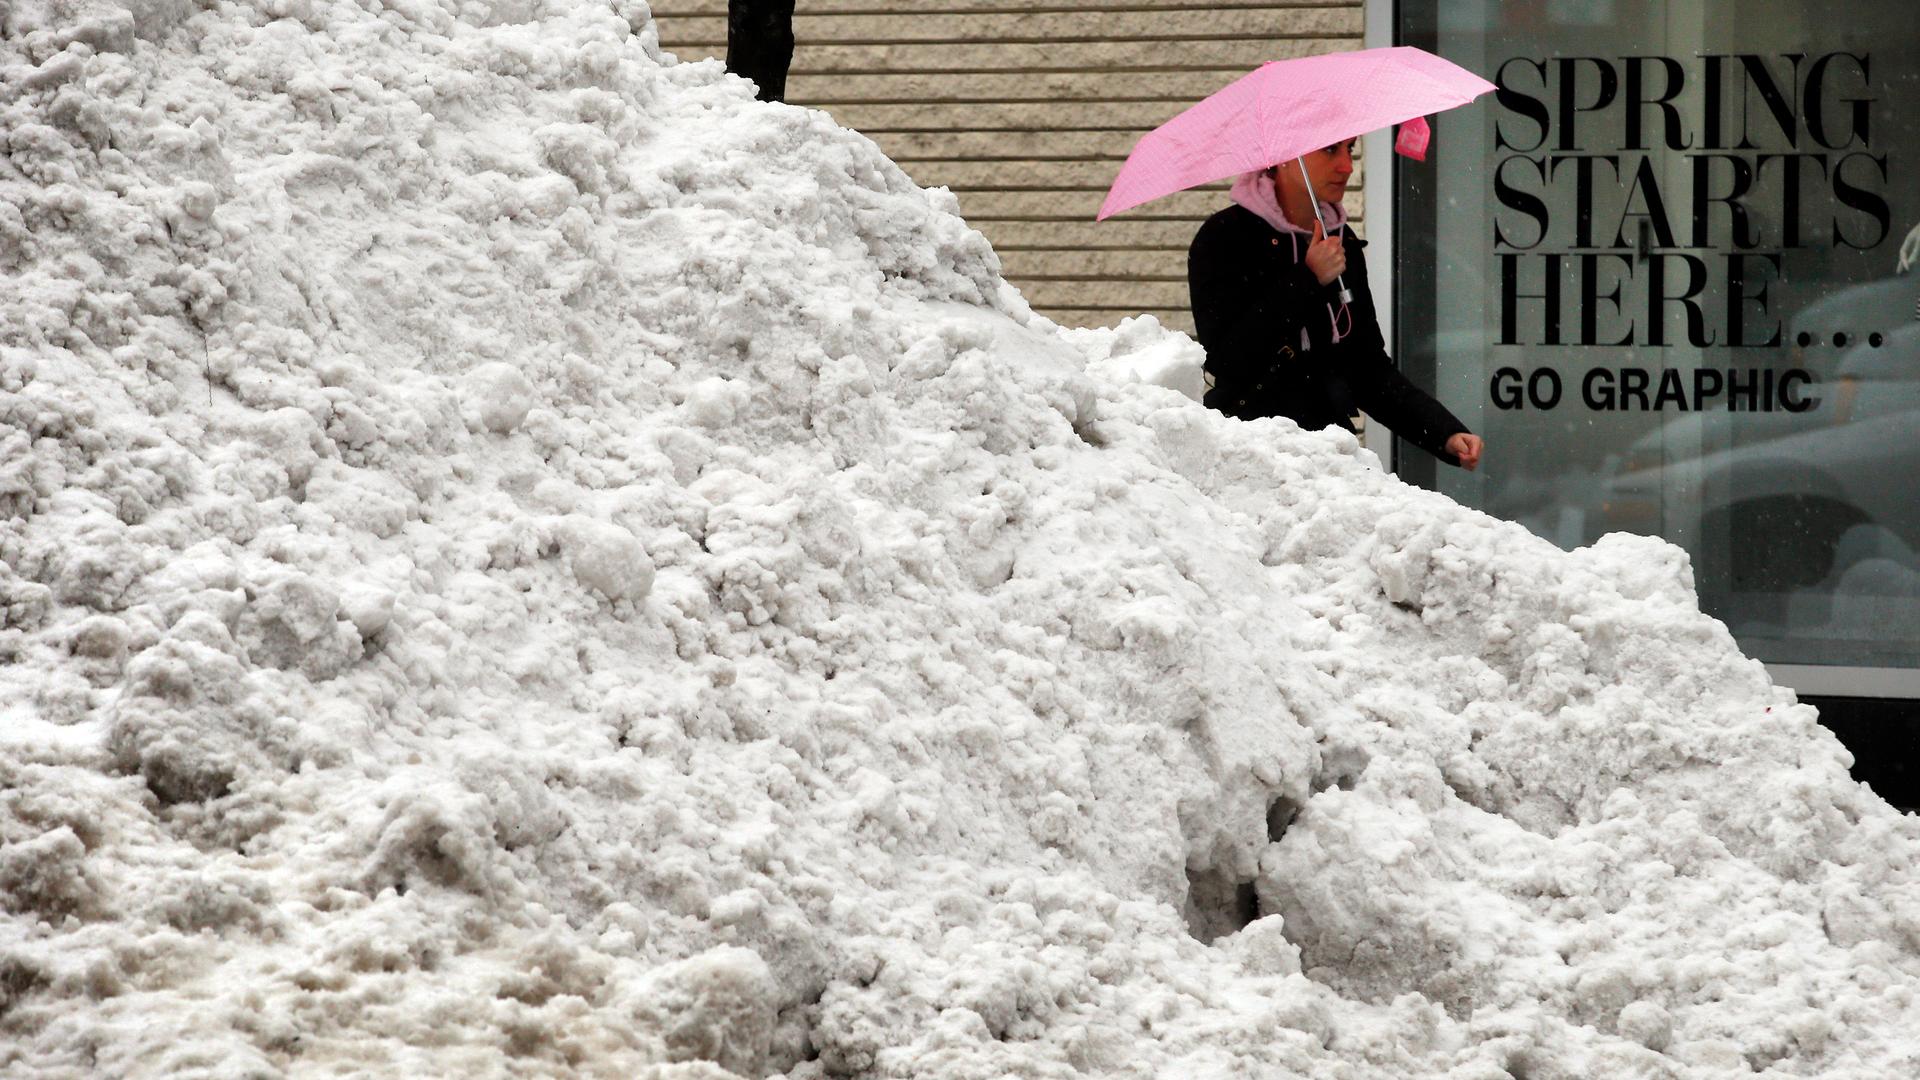 "Spring is coming" — A pedestrian walks past a pile of snow in Boston.